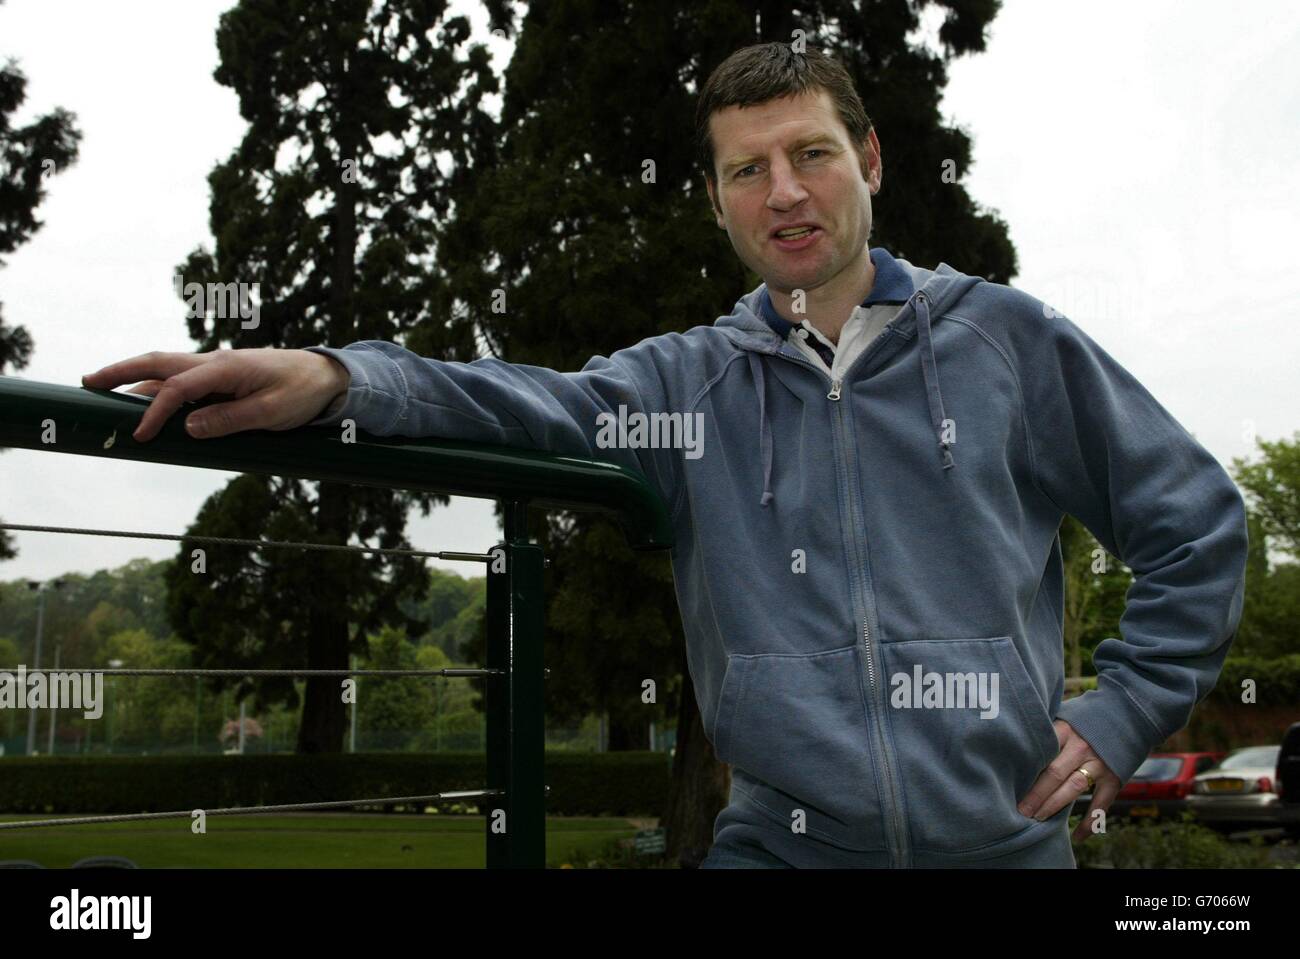 Wolverhampton Wanderers' Denis Irwin at Tettenhall tennis club, Wolverhampton. Irwin plays his final game, before retirement, against Tottenham Hotspur tomorrow, after long career with Manchester United, Leeds United, Oldham and the Republic of Ireland. Stock Photo